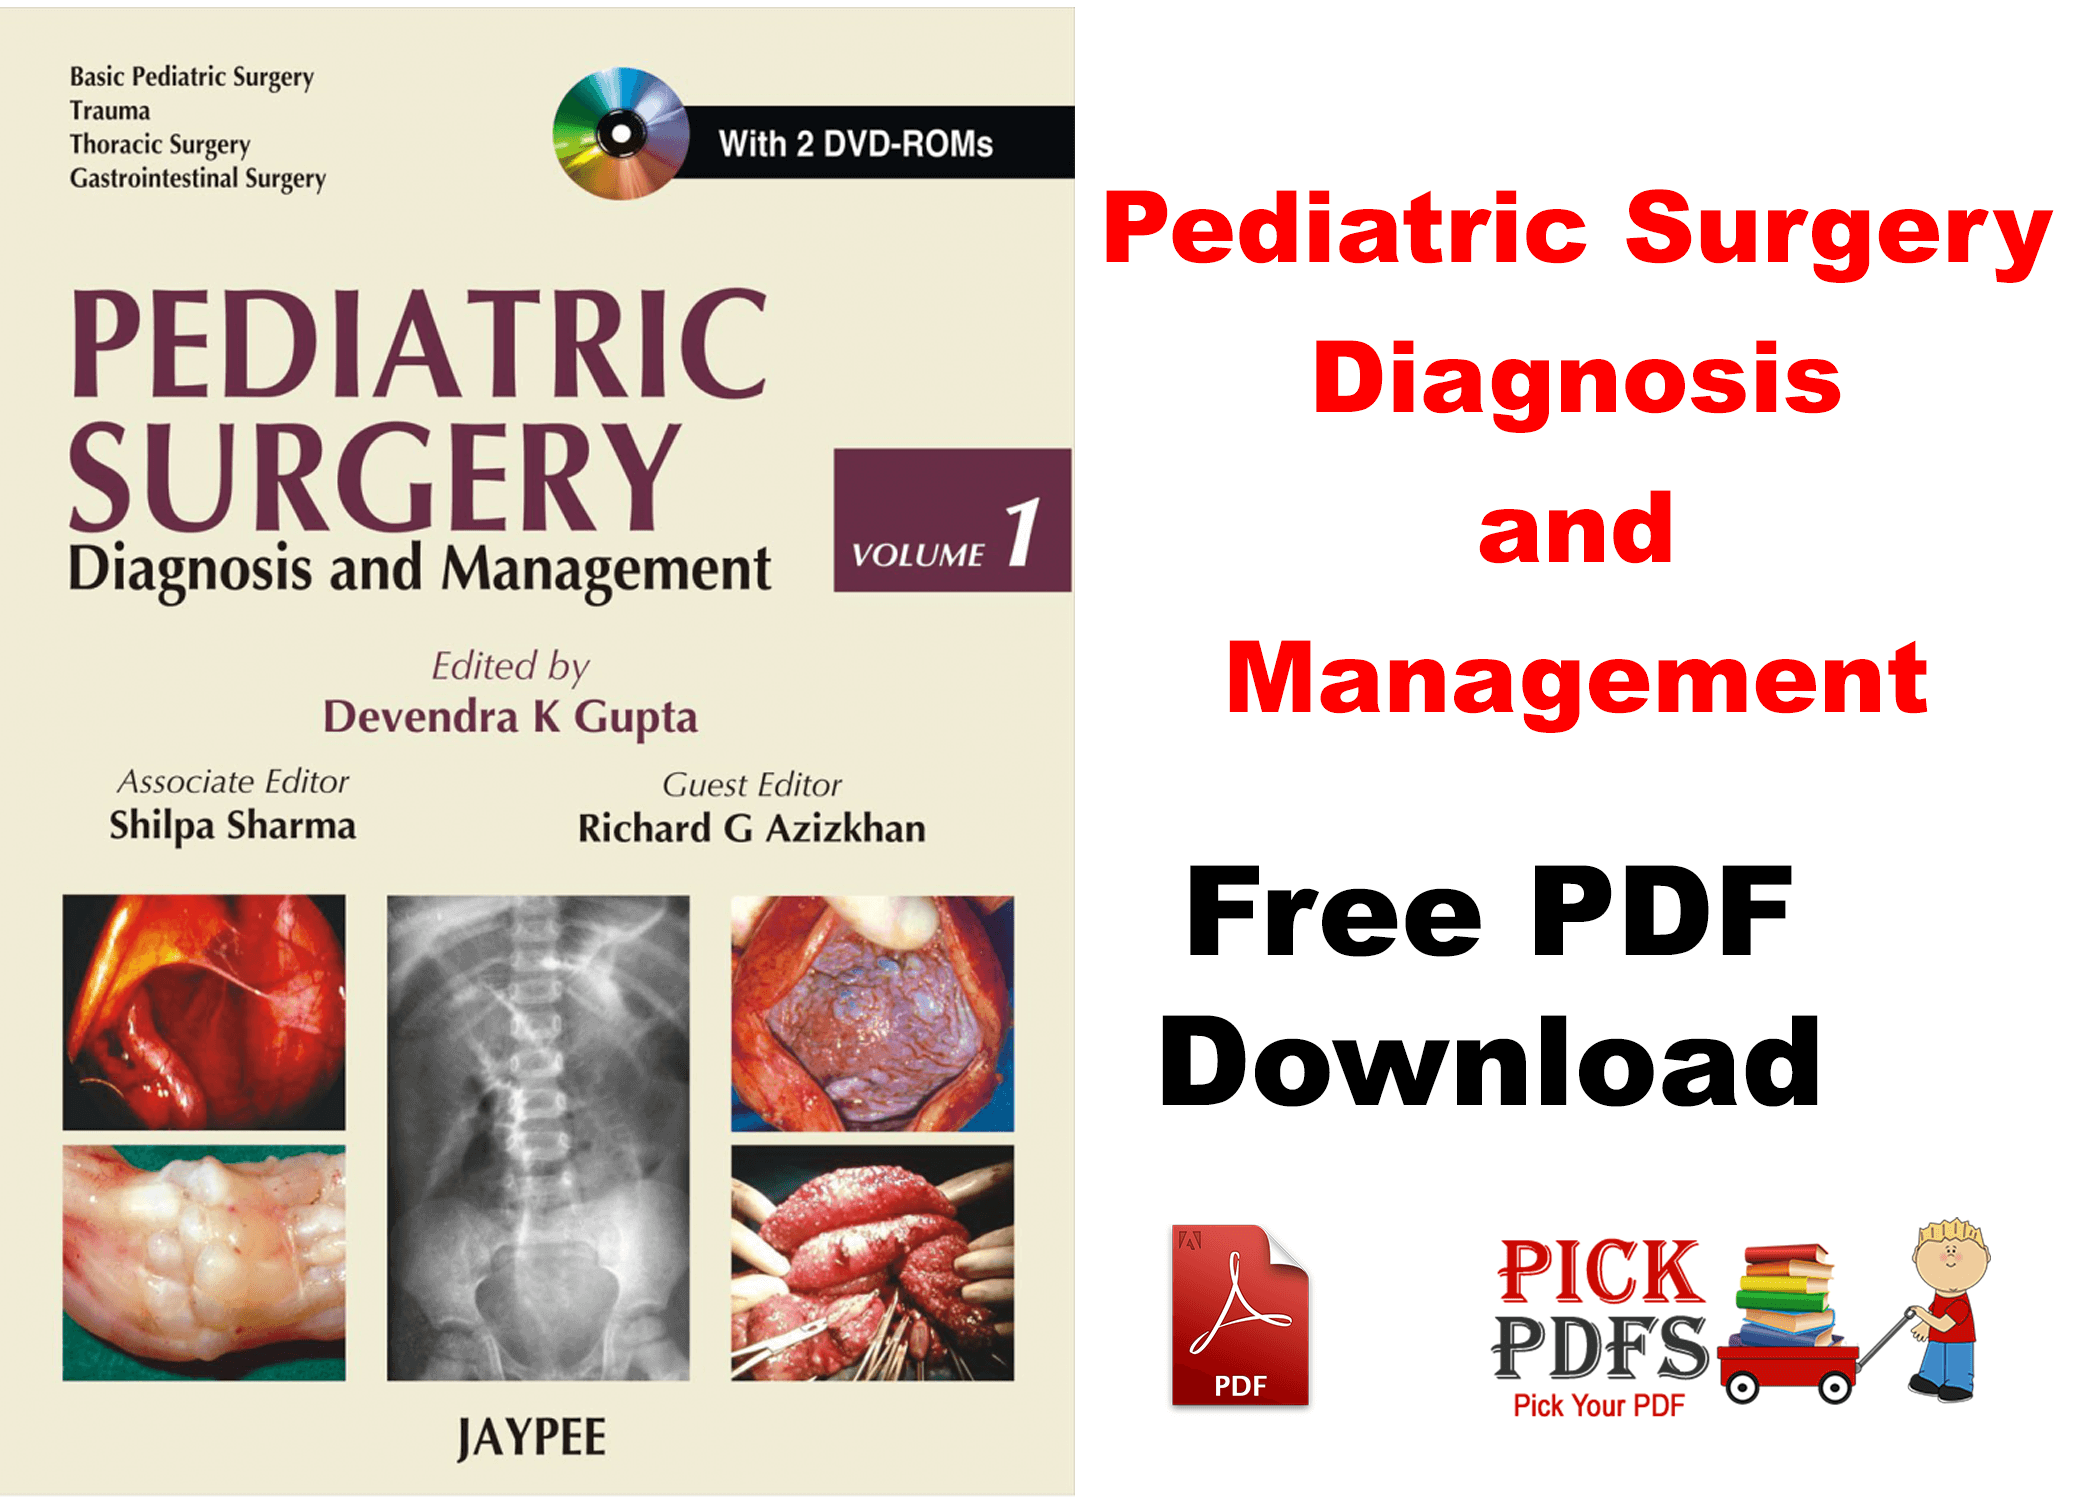 https://pickpdfs.com/pediatric-surgery-diagnosis-and-management-pdf-free-download/